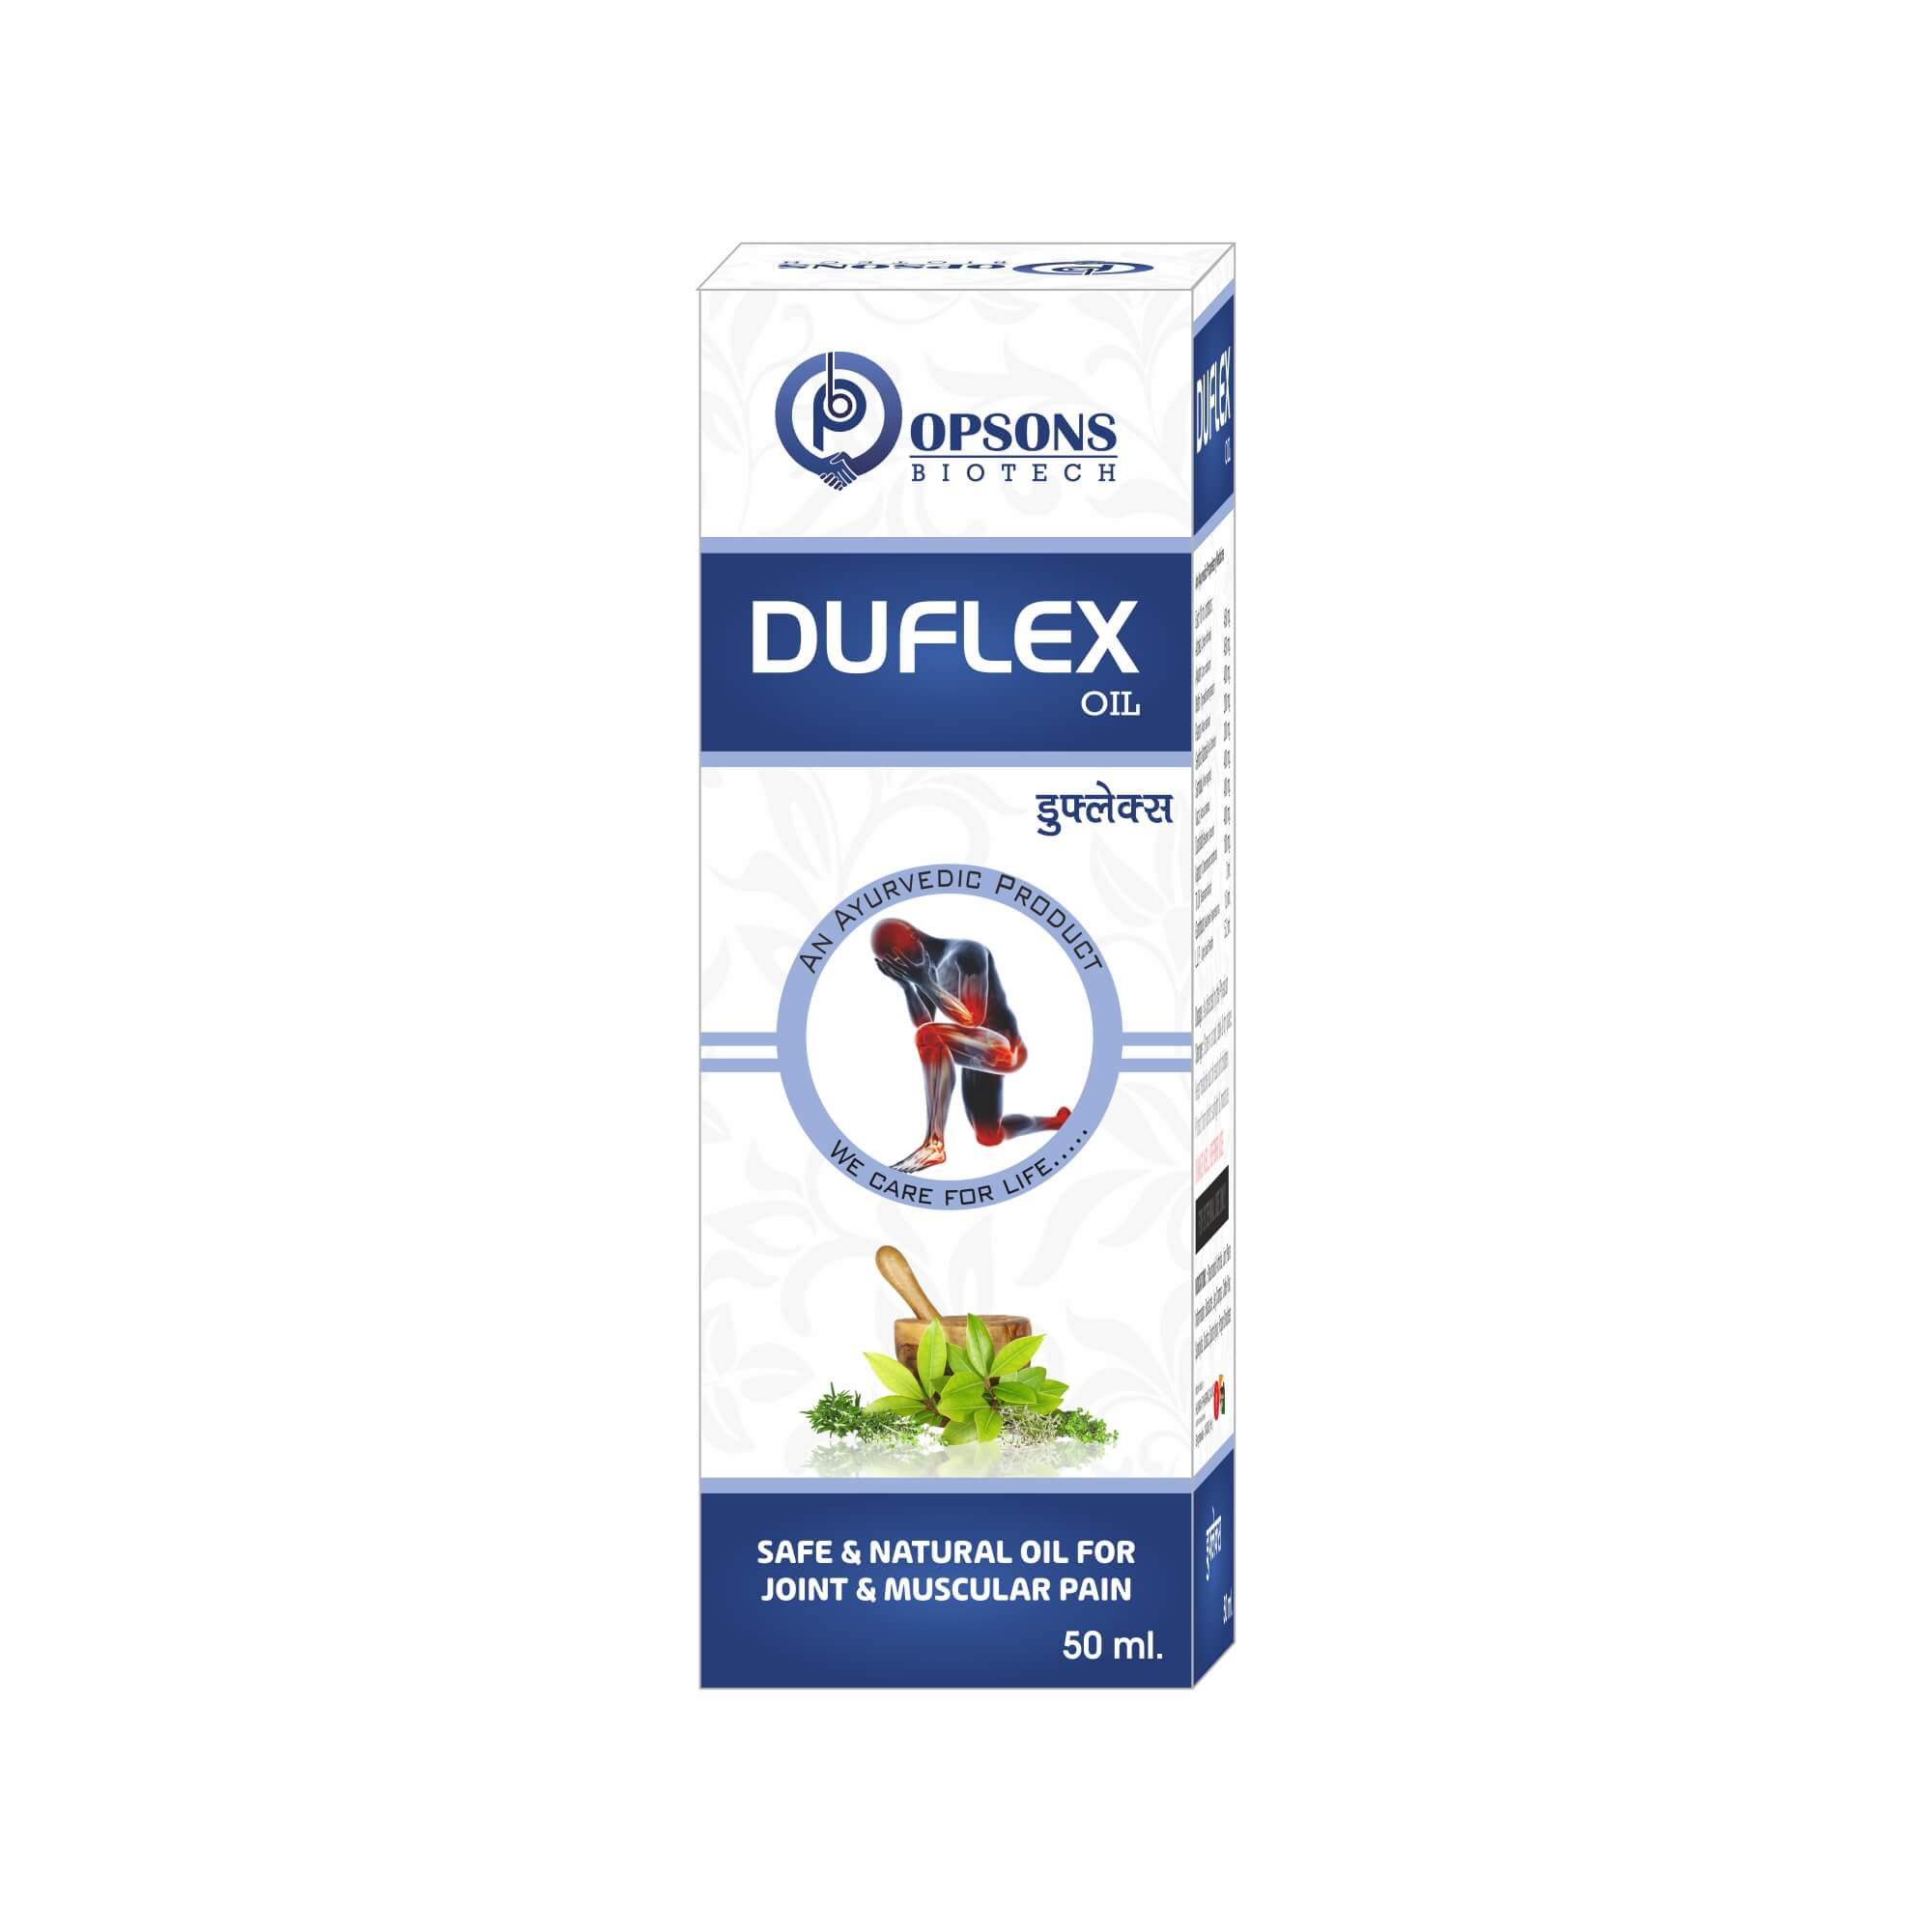 Product Name: Duflex, Compositions of Duflex are Safe & Natural Oil For Joint & Muscular Pain - Opsons Biotech